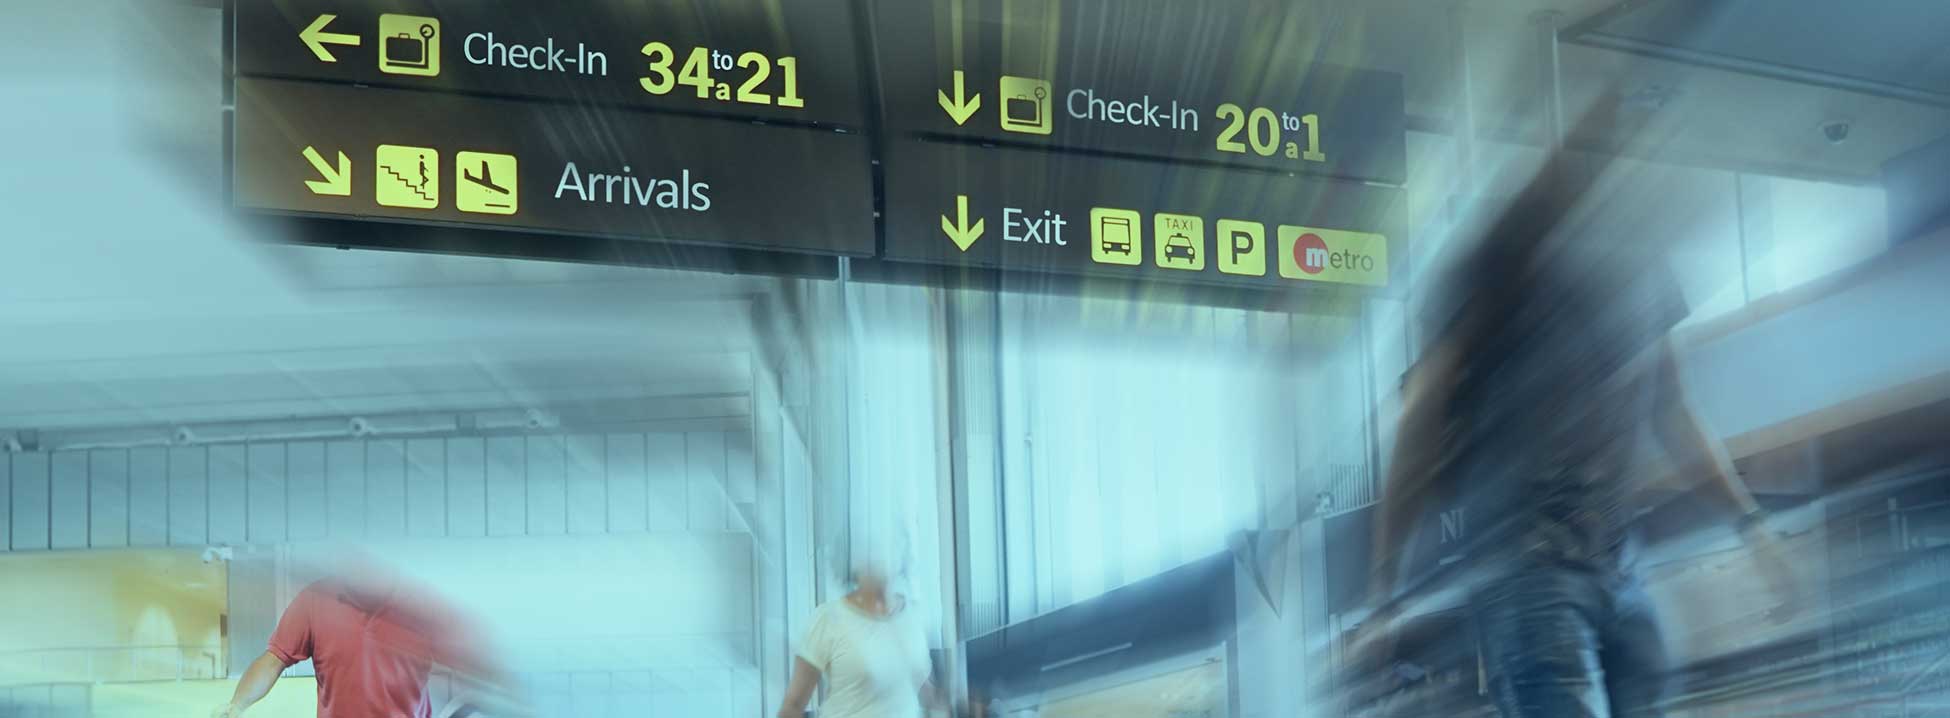 airport check in optimisation